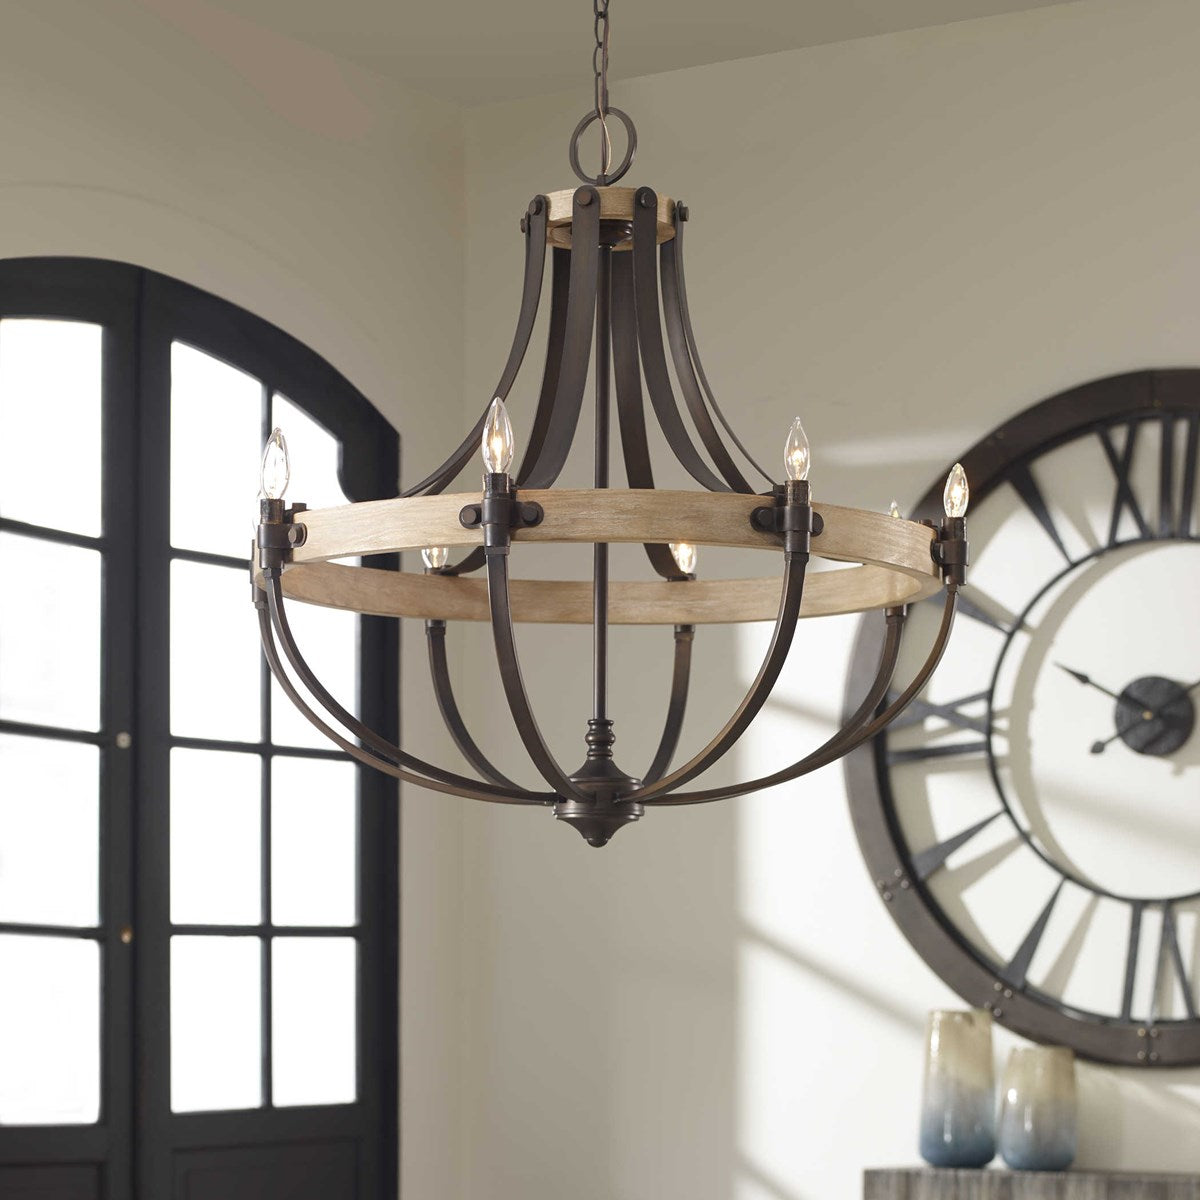 Decorative View. Updated Empire Shaped 8 Lt. Chandelier With A French Influence, Featuring A Ring Of